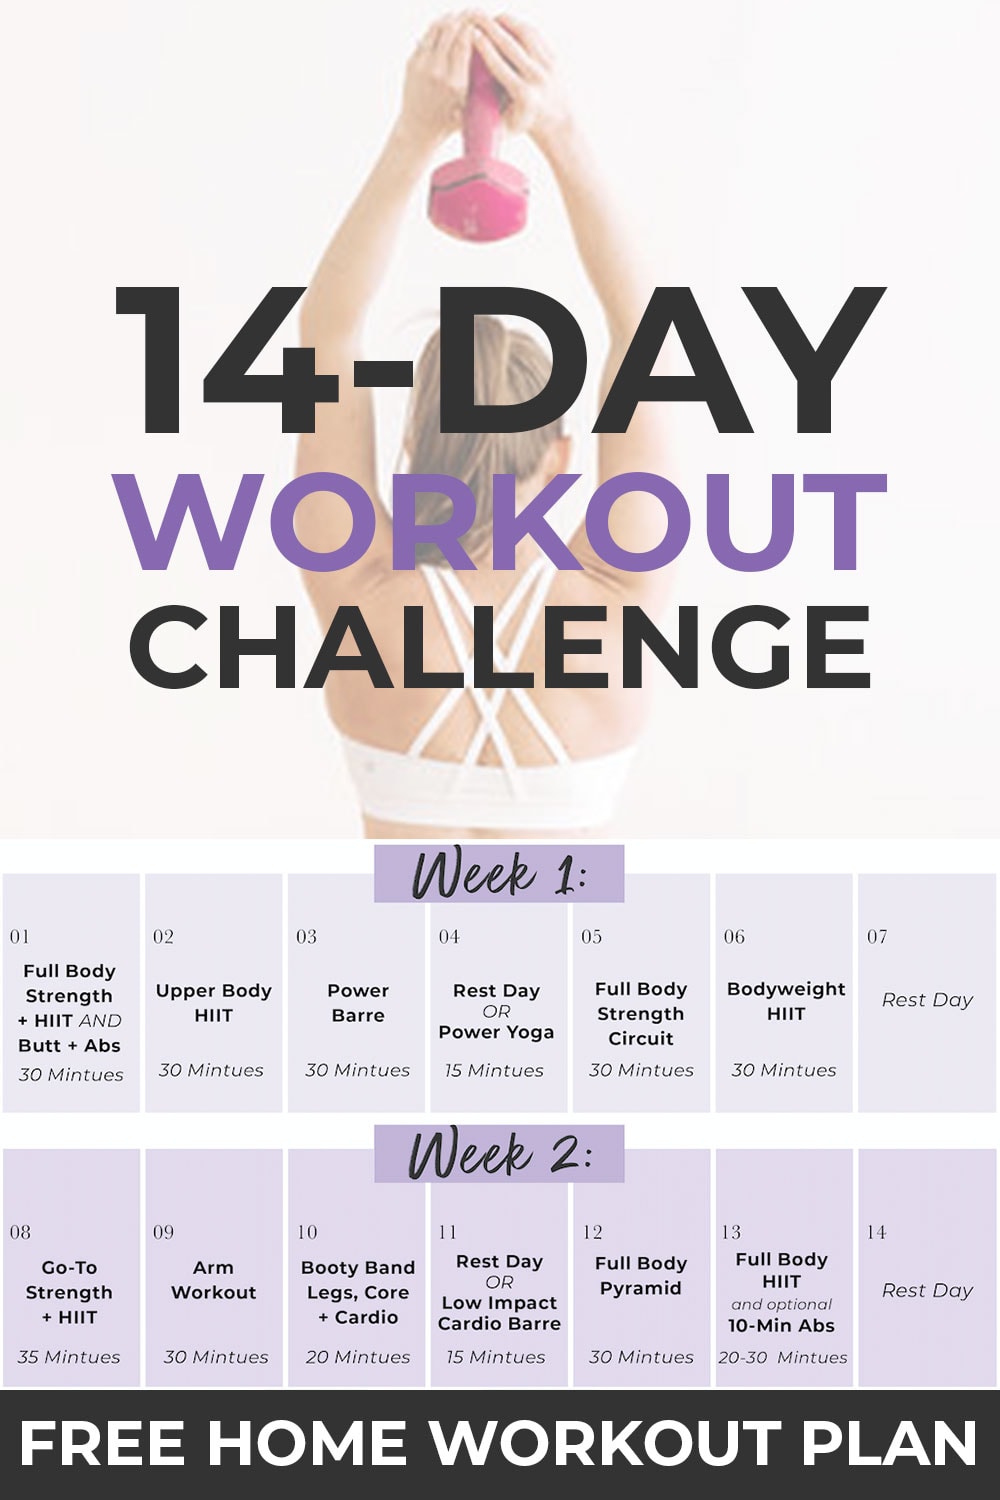 14-Day Workout Challenge + Full Body Workout Plan | Nourish Move Love